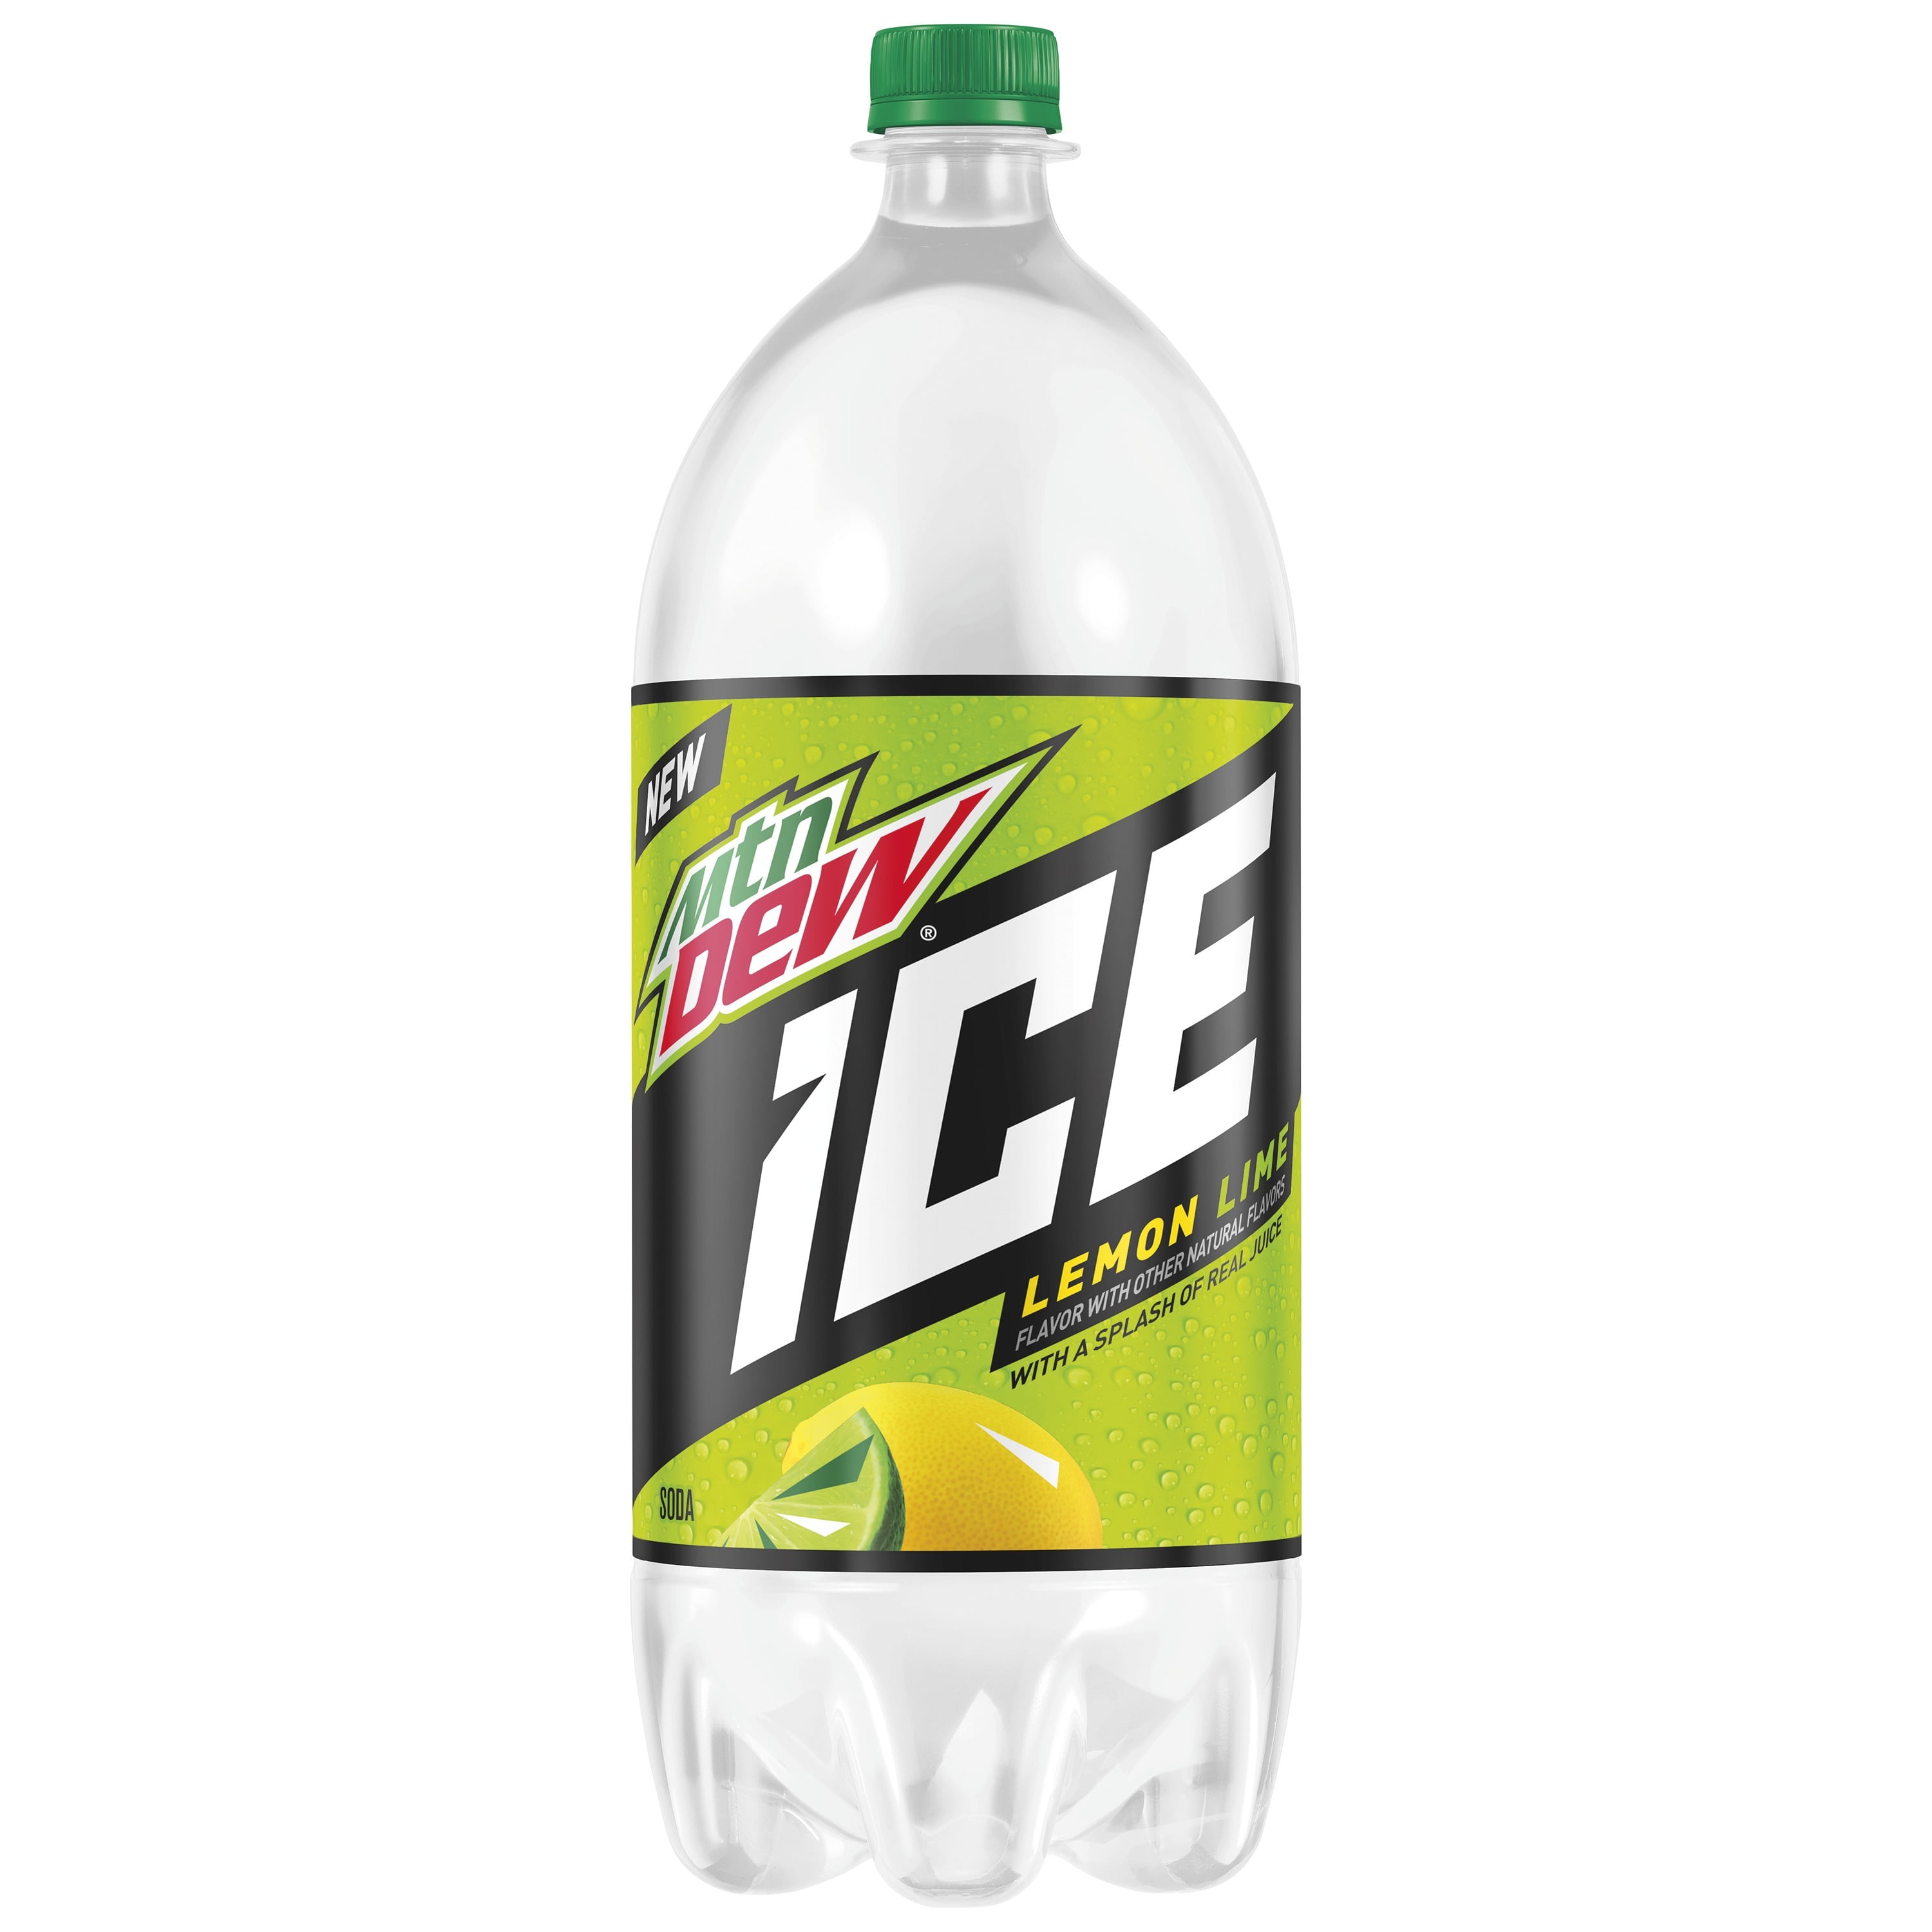 is there diet mt dew ice